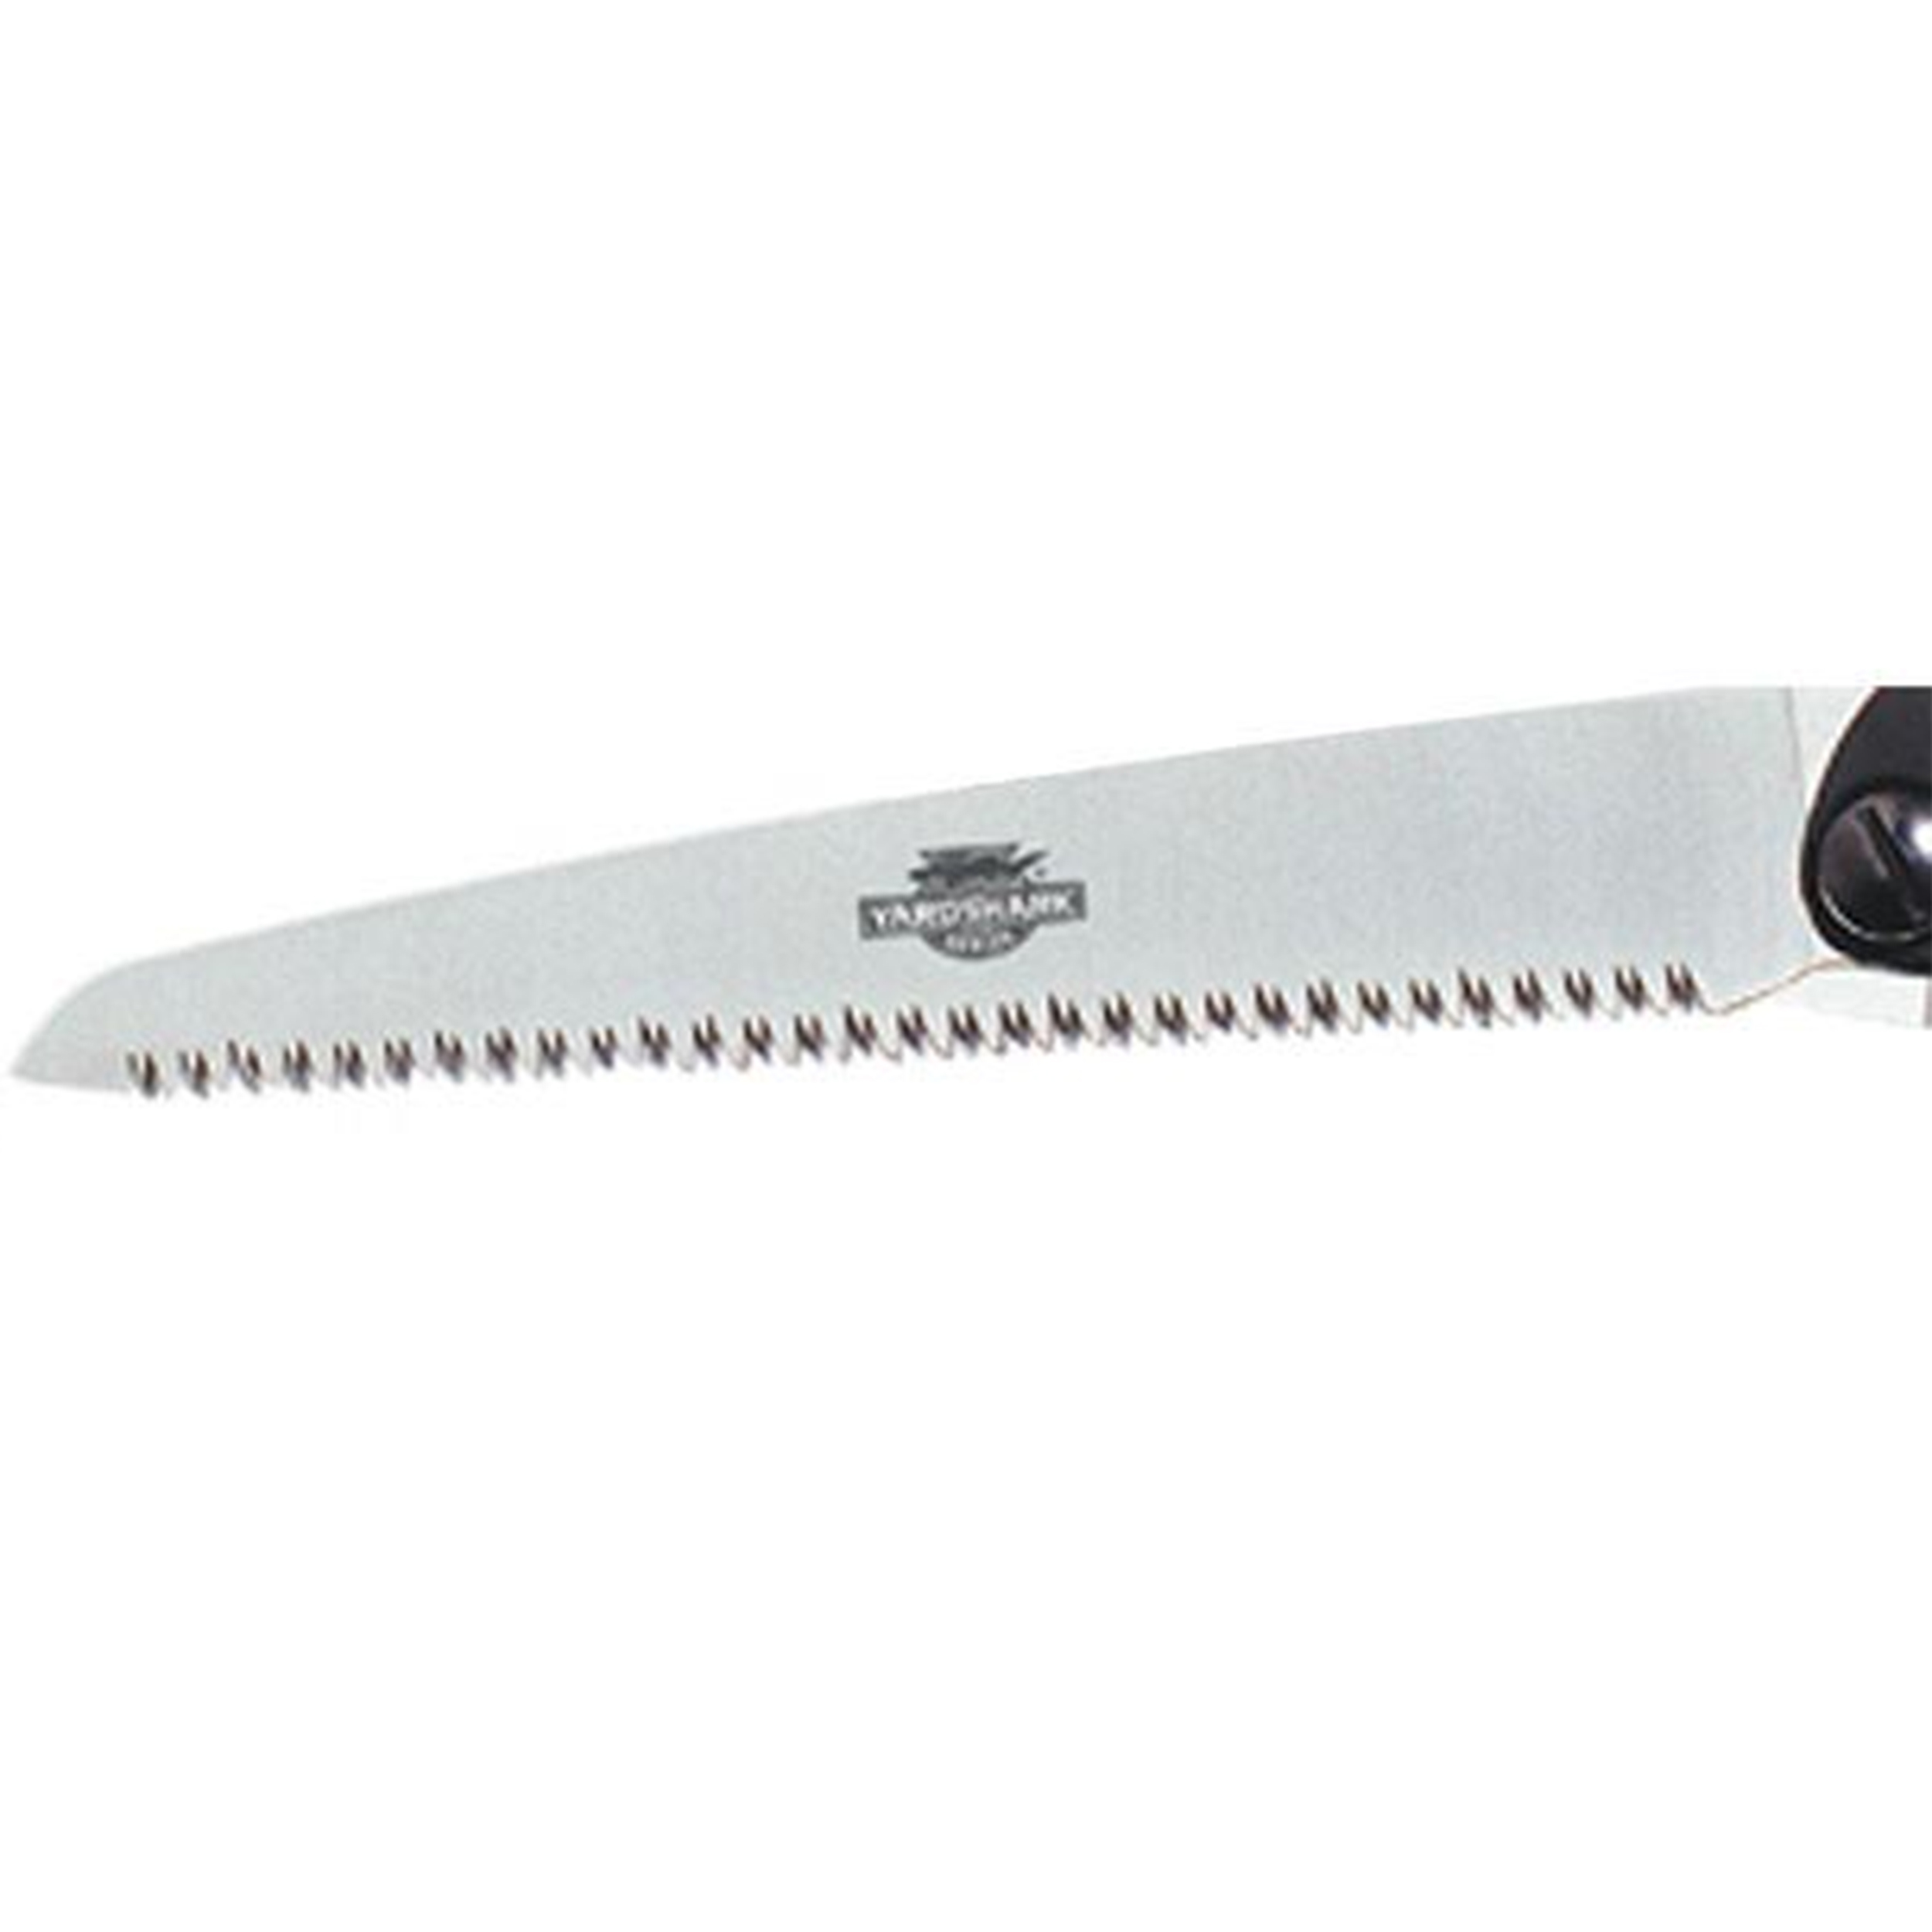 Replacement Blade 01-5437 For Pruning Saw 10-5437